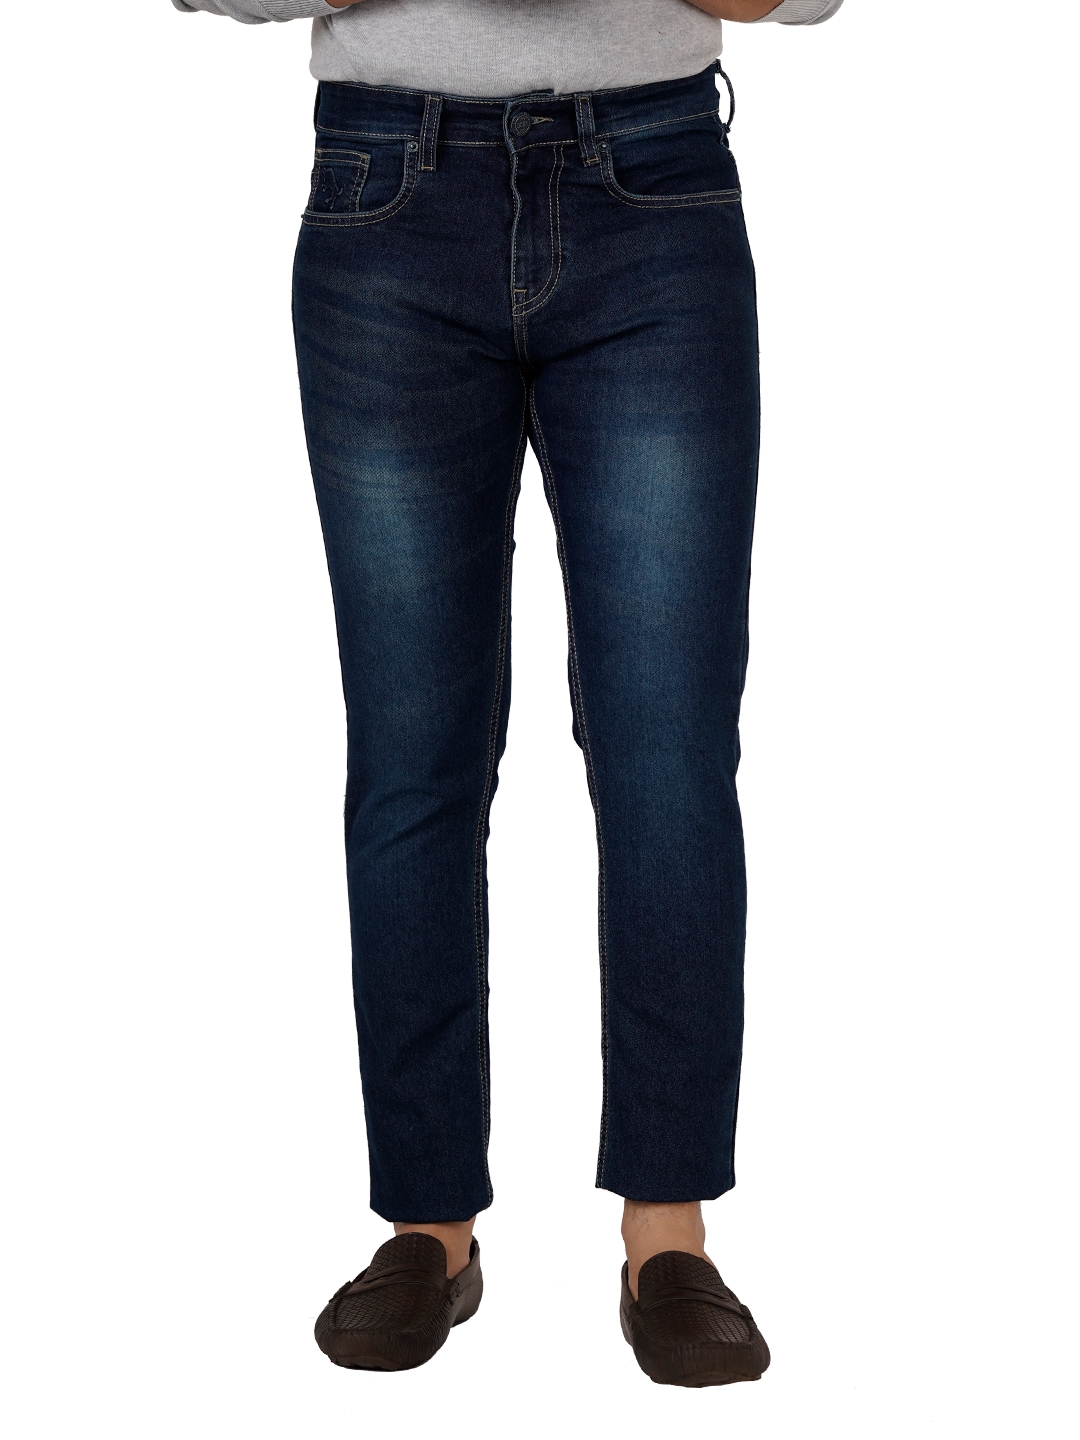 D'cot by Donear | D'cot by Donear Men's Navy Blue Cotton Jeans